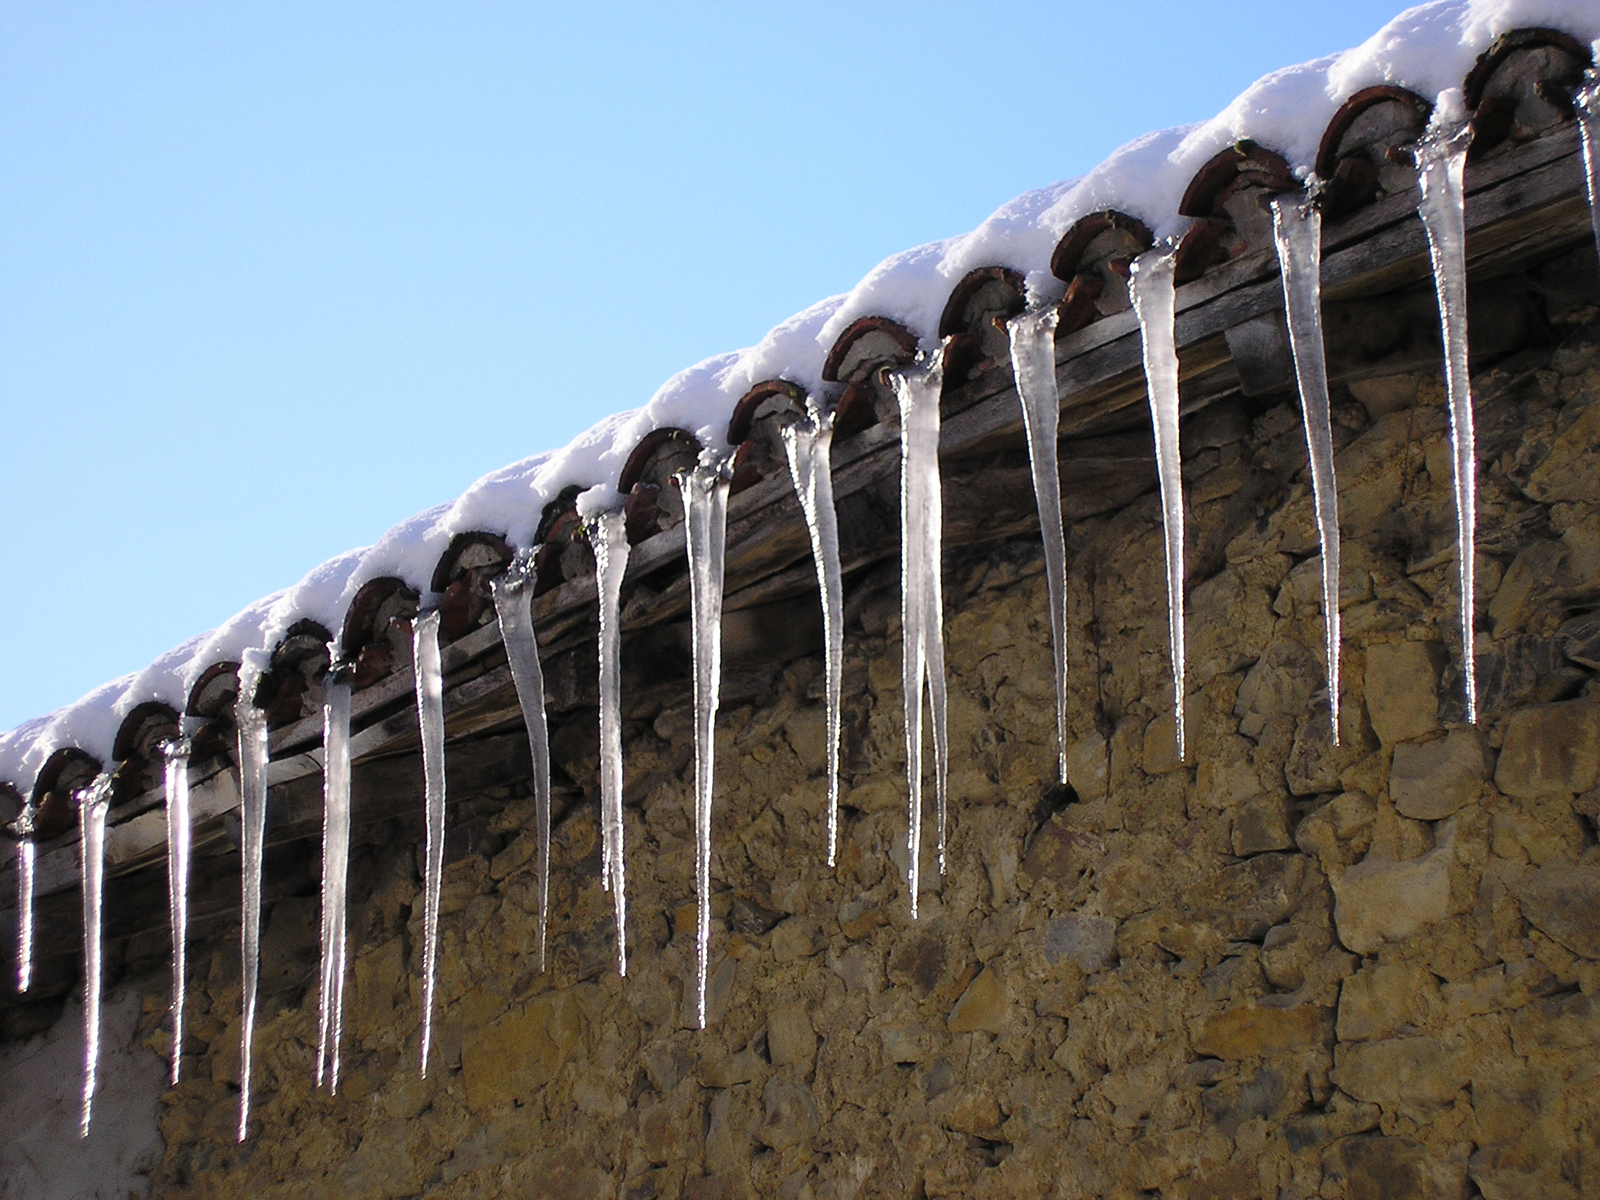 Icicles hanging from the eave of the roof. Luis Manuel Peña